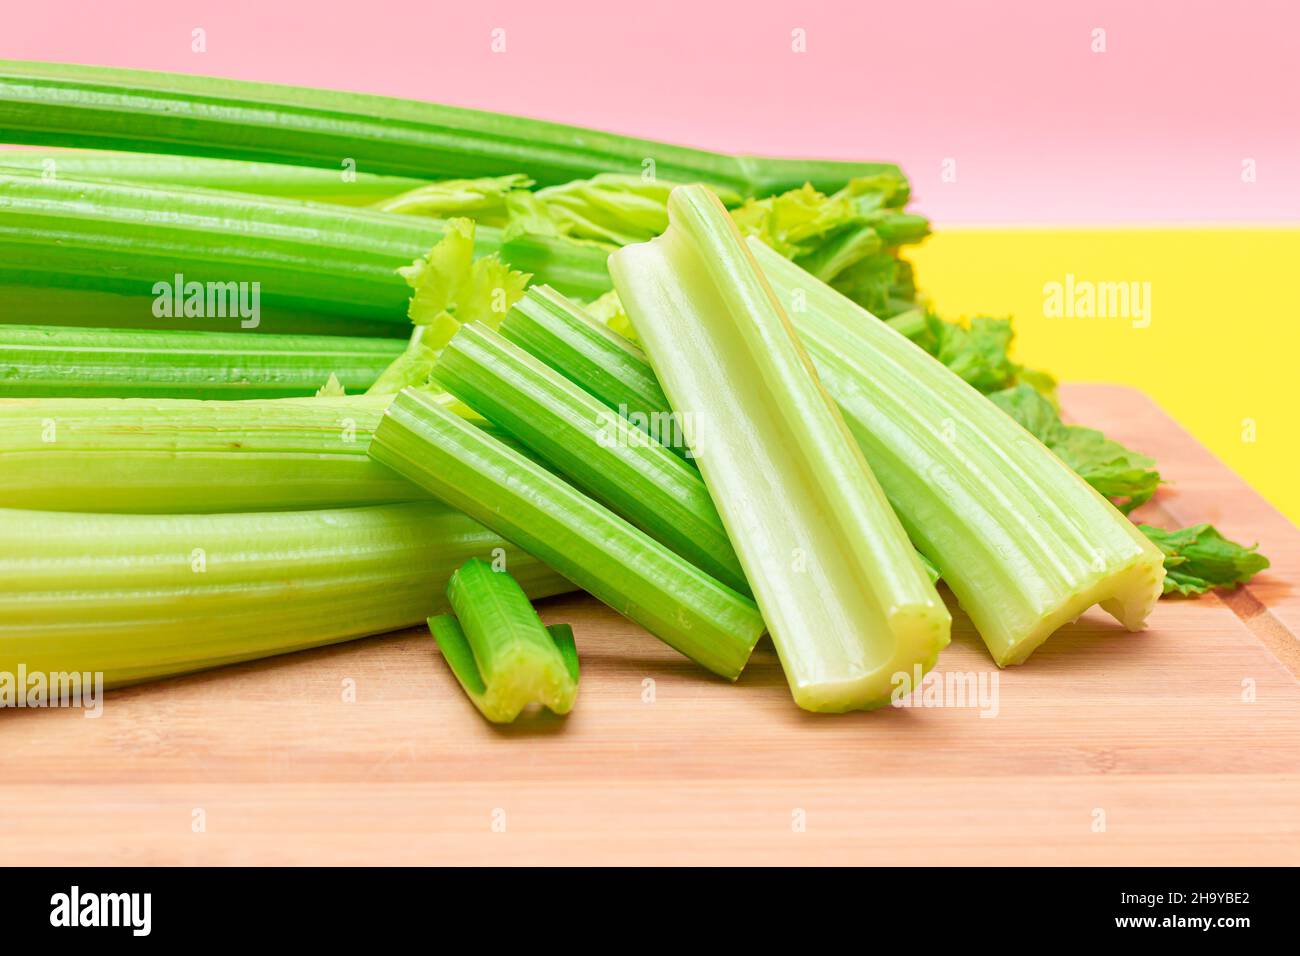 Fresh Celery Stem and Chopped Celery Sticks on Wooden Cutting Board. Vegan and Vegetarian Culture. Raw Food. Healthy Diet with Negative Calorie Content. Slimming Food Stock Photo